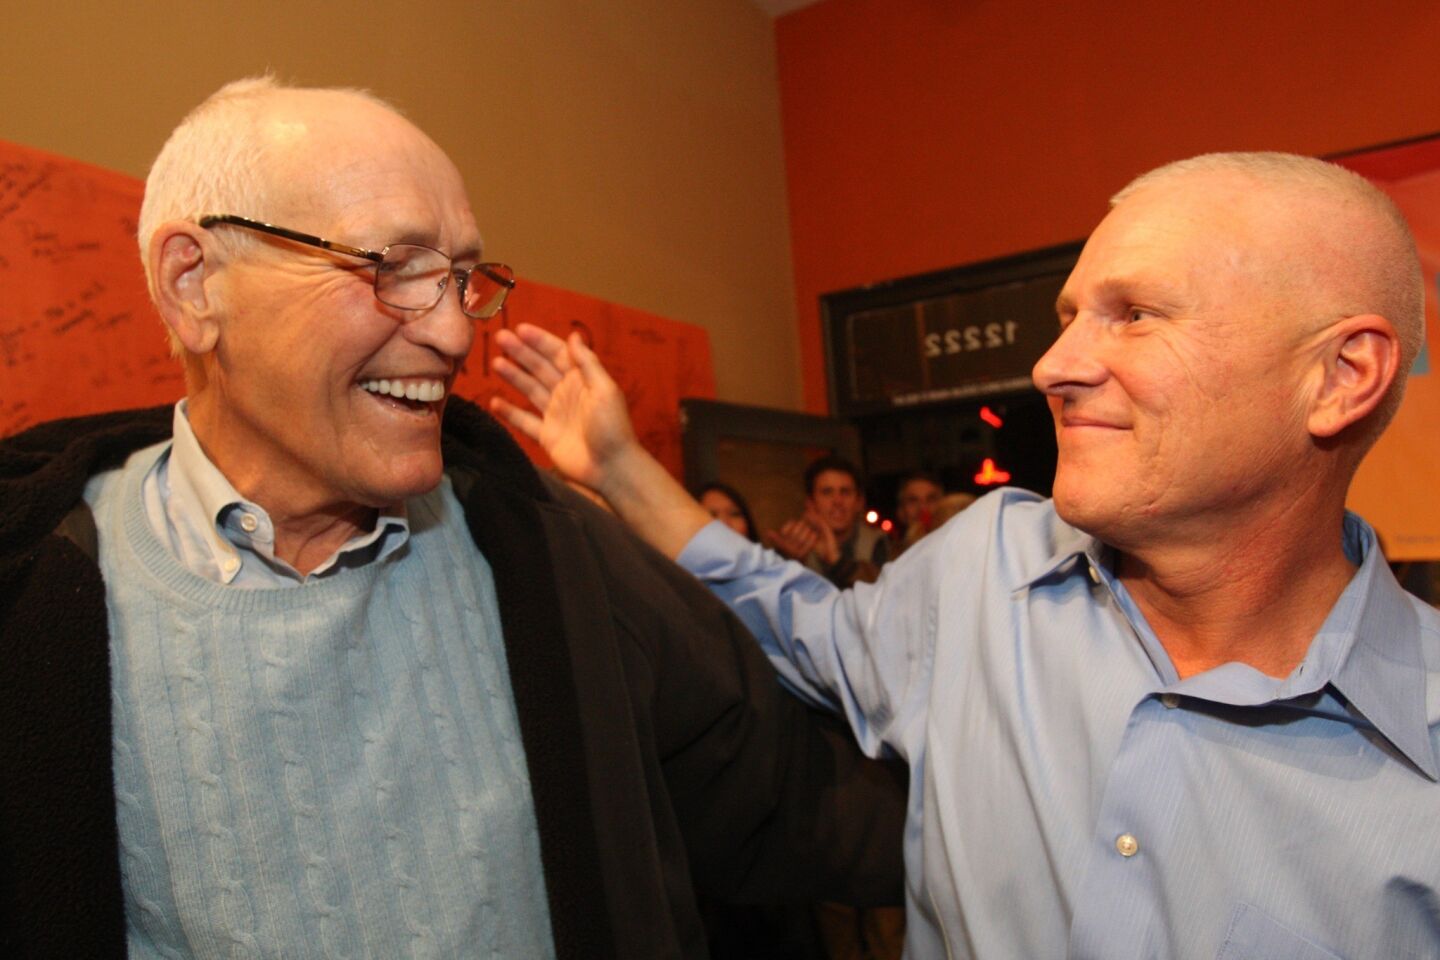 Los Angeles City Council candidate Mike Bonin, right, is shown with current City Councilman Bill Rosendahl at Bonin's election-night headquarters party in Mar Vista.